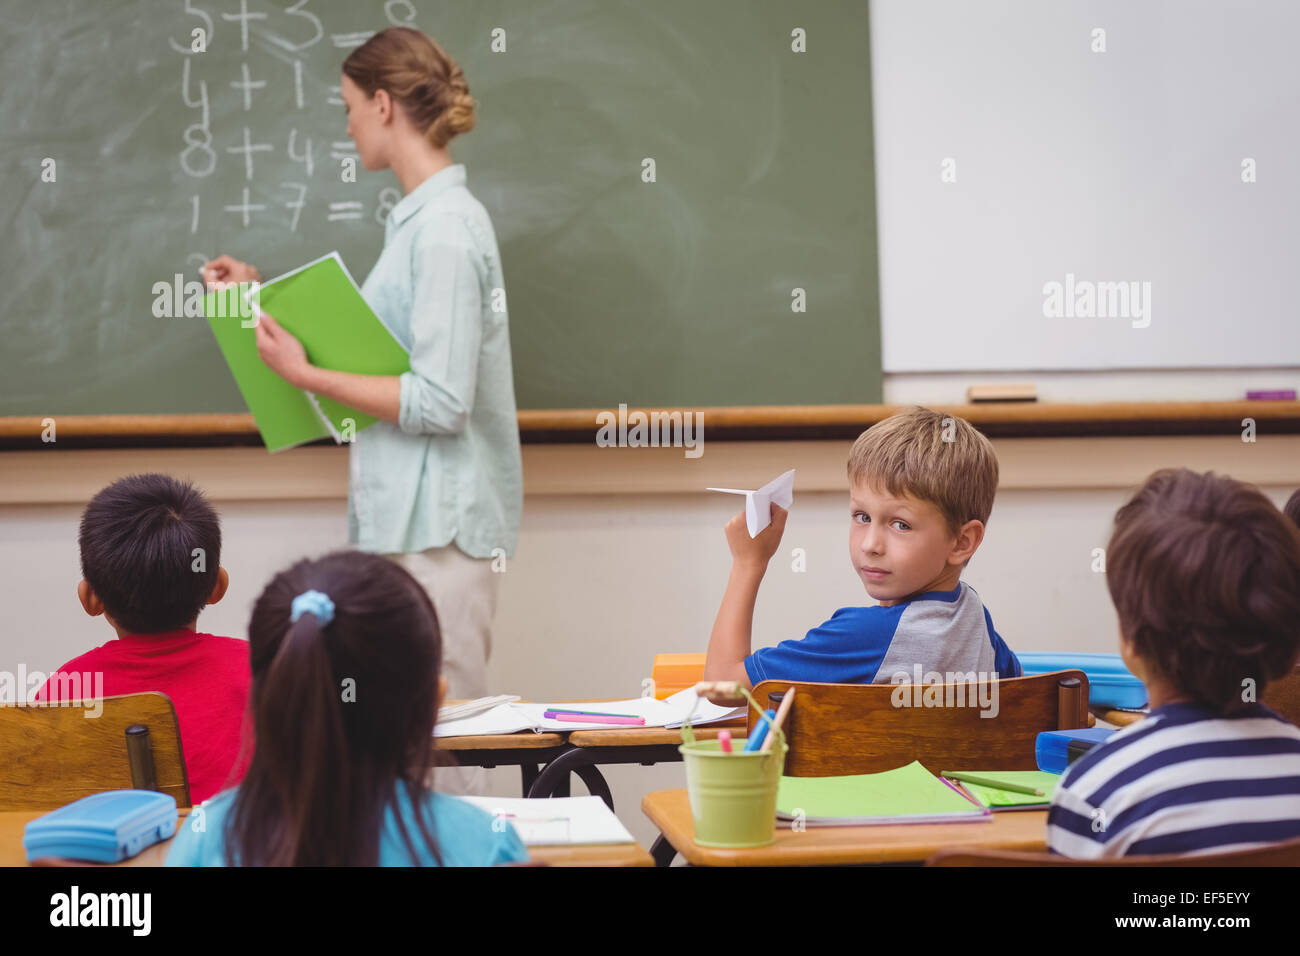 Naughty pupil about to throw paper airplane in class Stock Photo